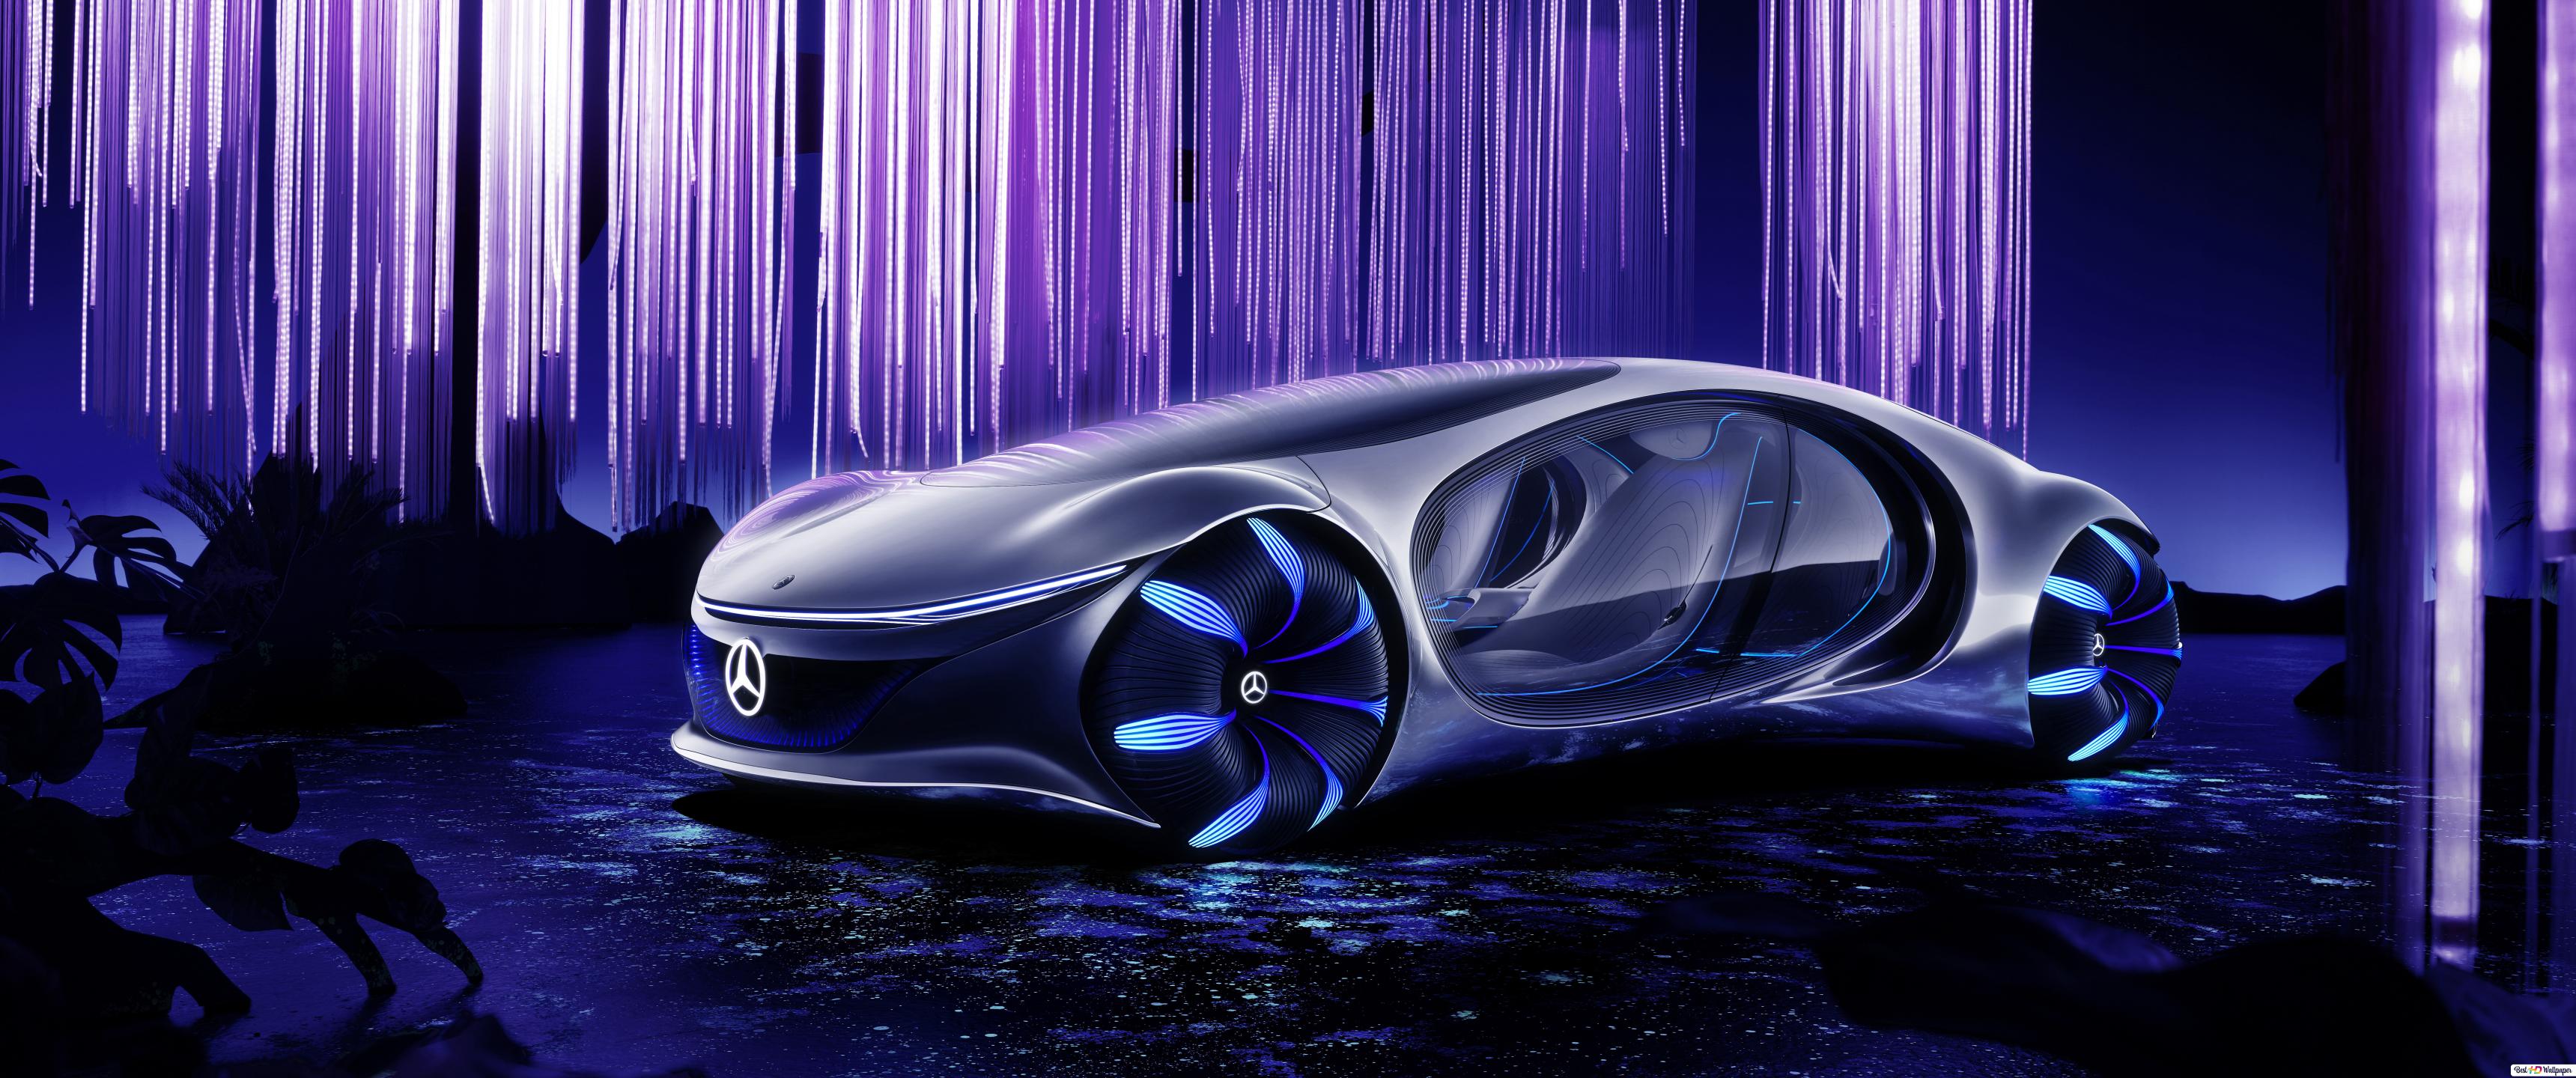 Mercedes Benz Vision AVTR In An Artistic Purple Background HD Wallpaper Download